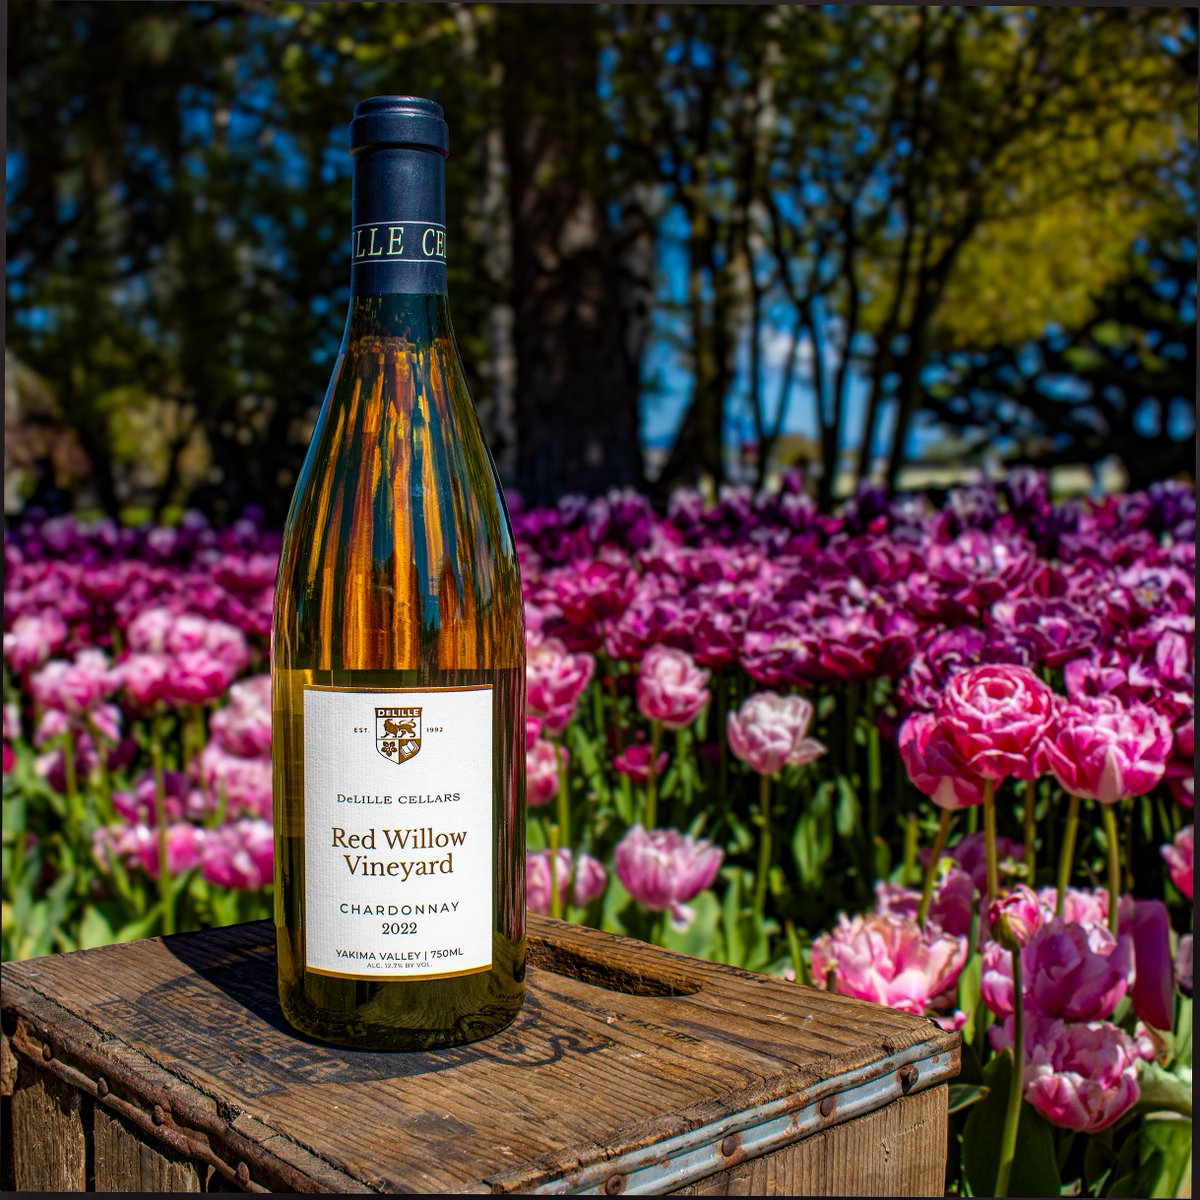 Announcing our 2022 Red Willow Chardonnay! Our longstanding partnership with Red Willow vineyard has helped us produce our newest single vineyard wine, which showcases citrusy, tropical notes balanced by bright acid and buttery notes. Find it here: delillecellars.com/wine/2022-red-…